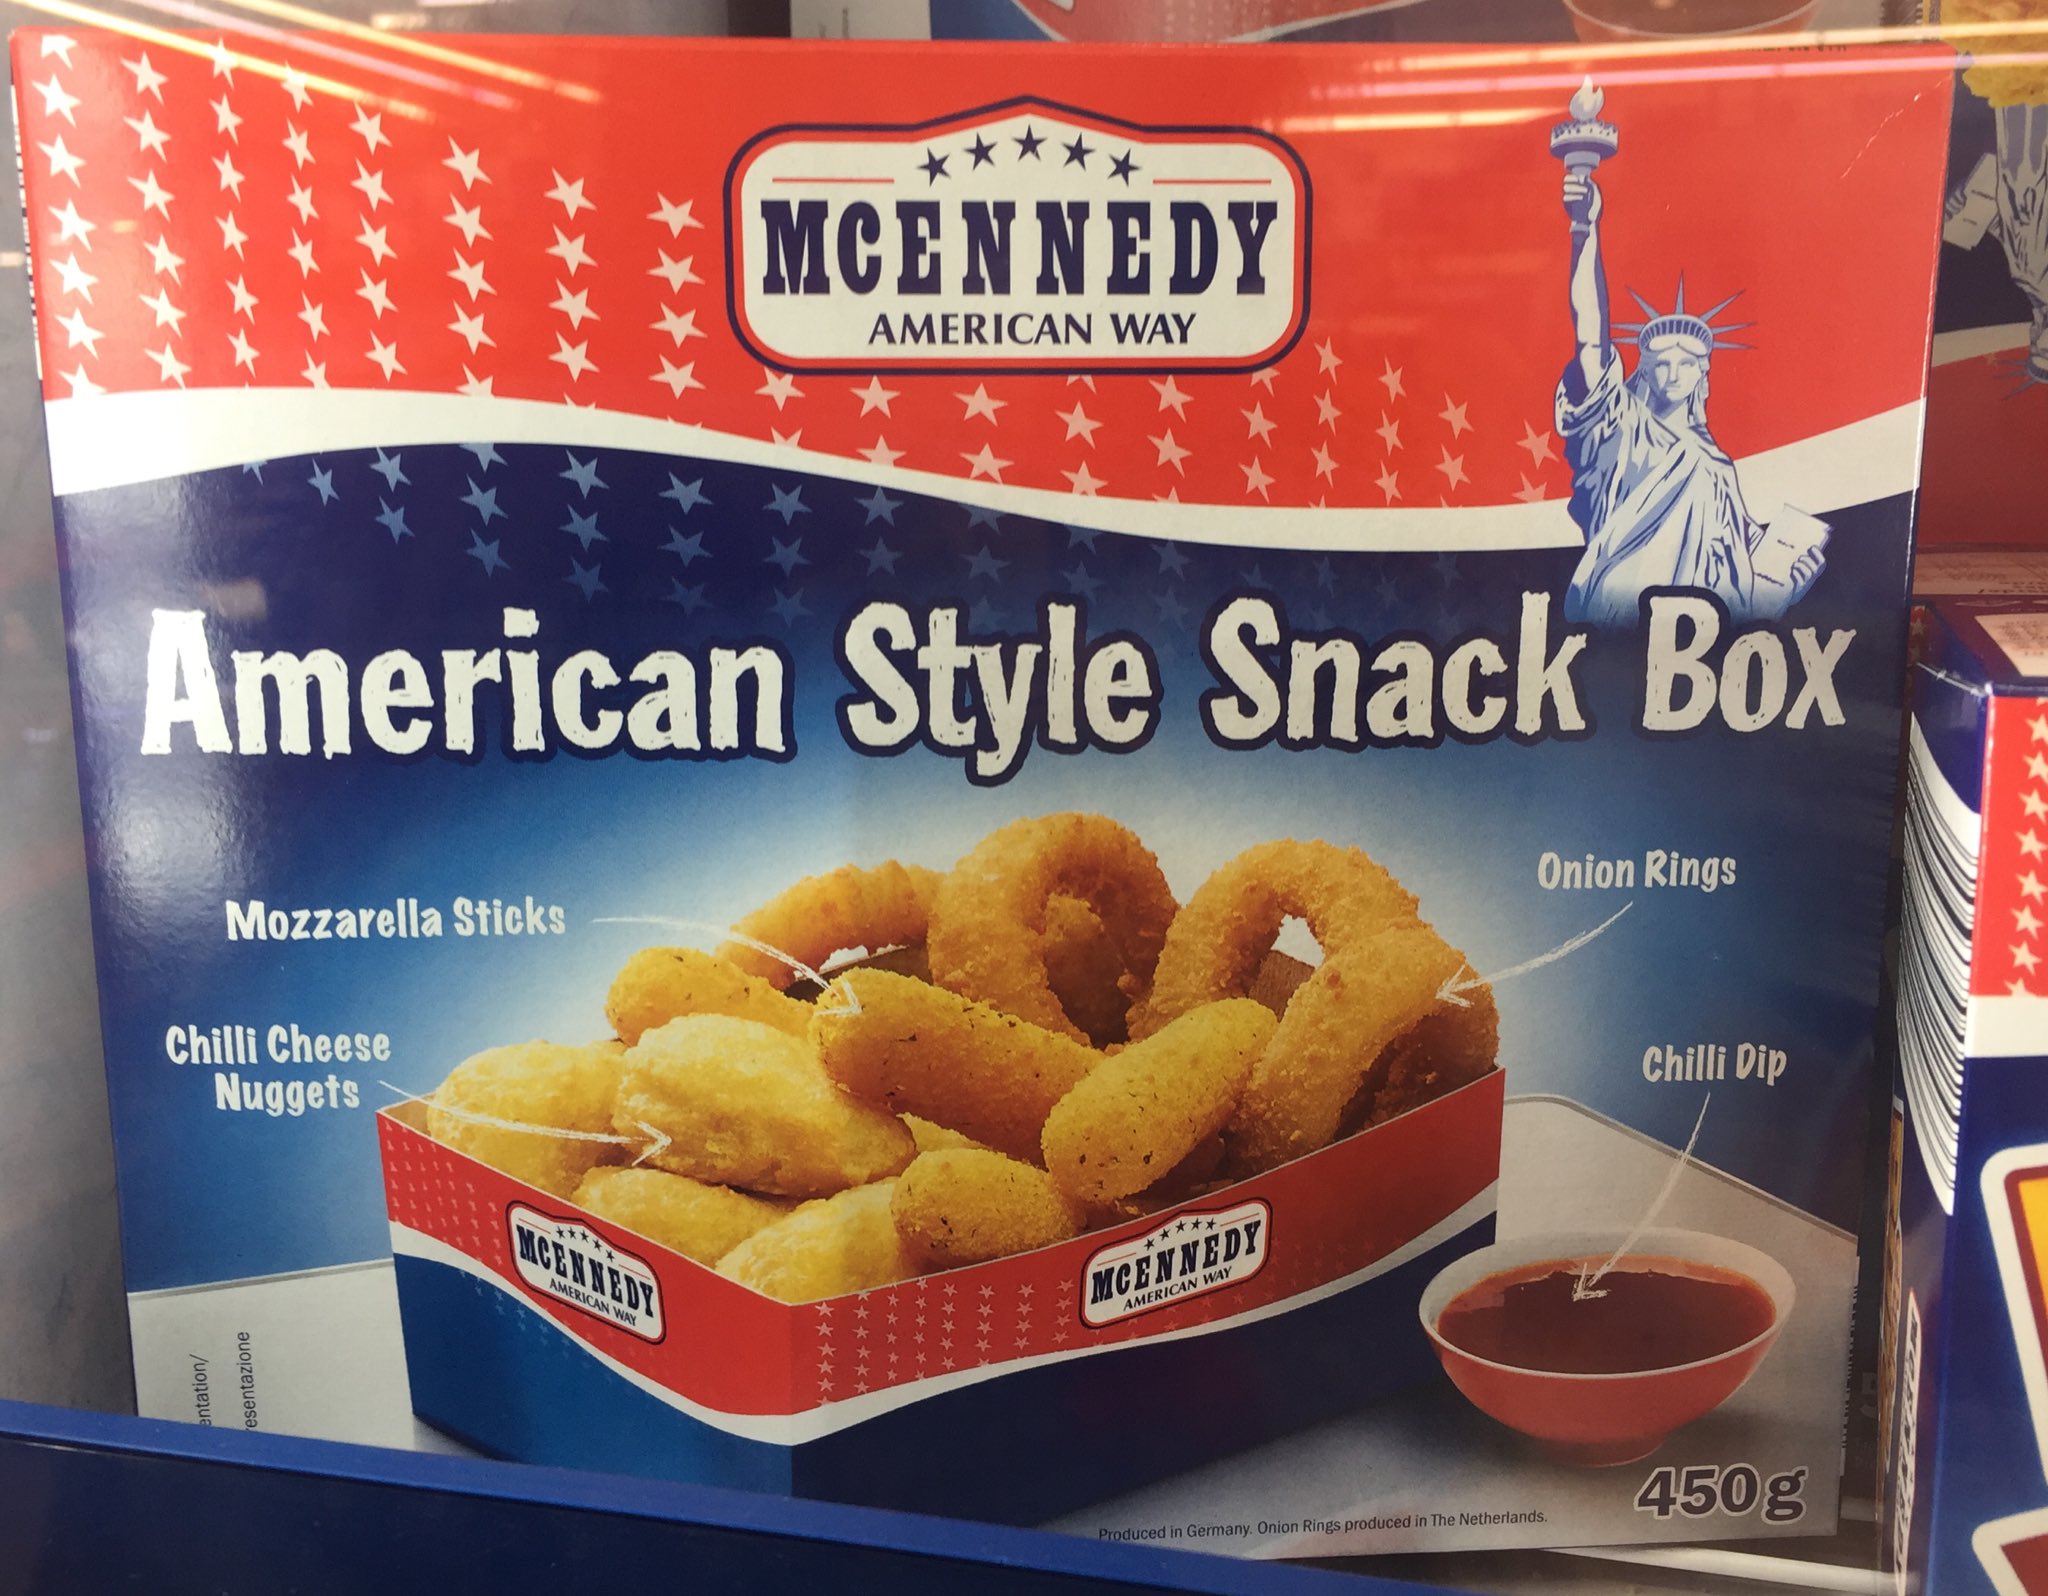 Denise at Mousesteps on Twitter: "Lidl grocery in Belgium has frozen box you can buy if you want eat an American. :) #belgium https://t.co/F3tdKazmf1" / Twitter